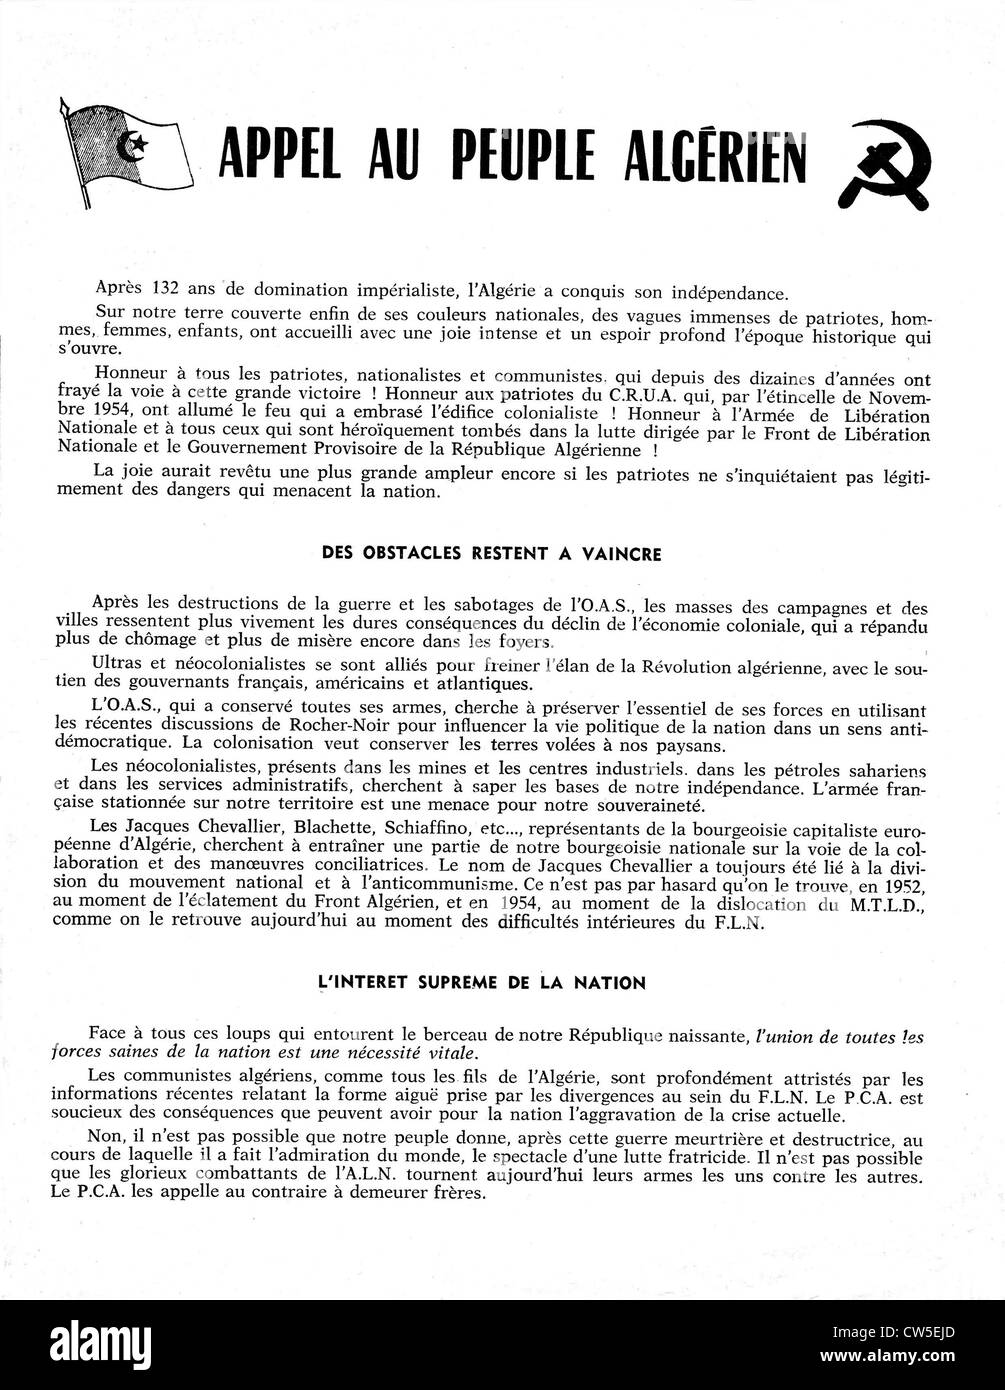 Leaflet of the Algerian Communist Party: "Call to the Algerian people ...